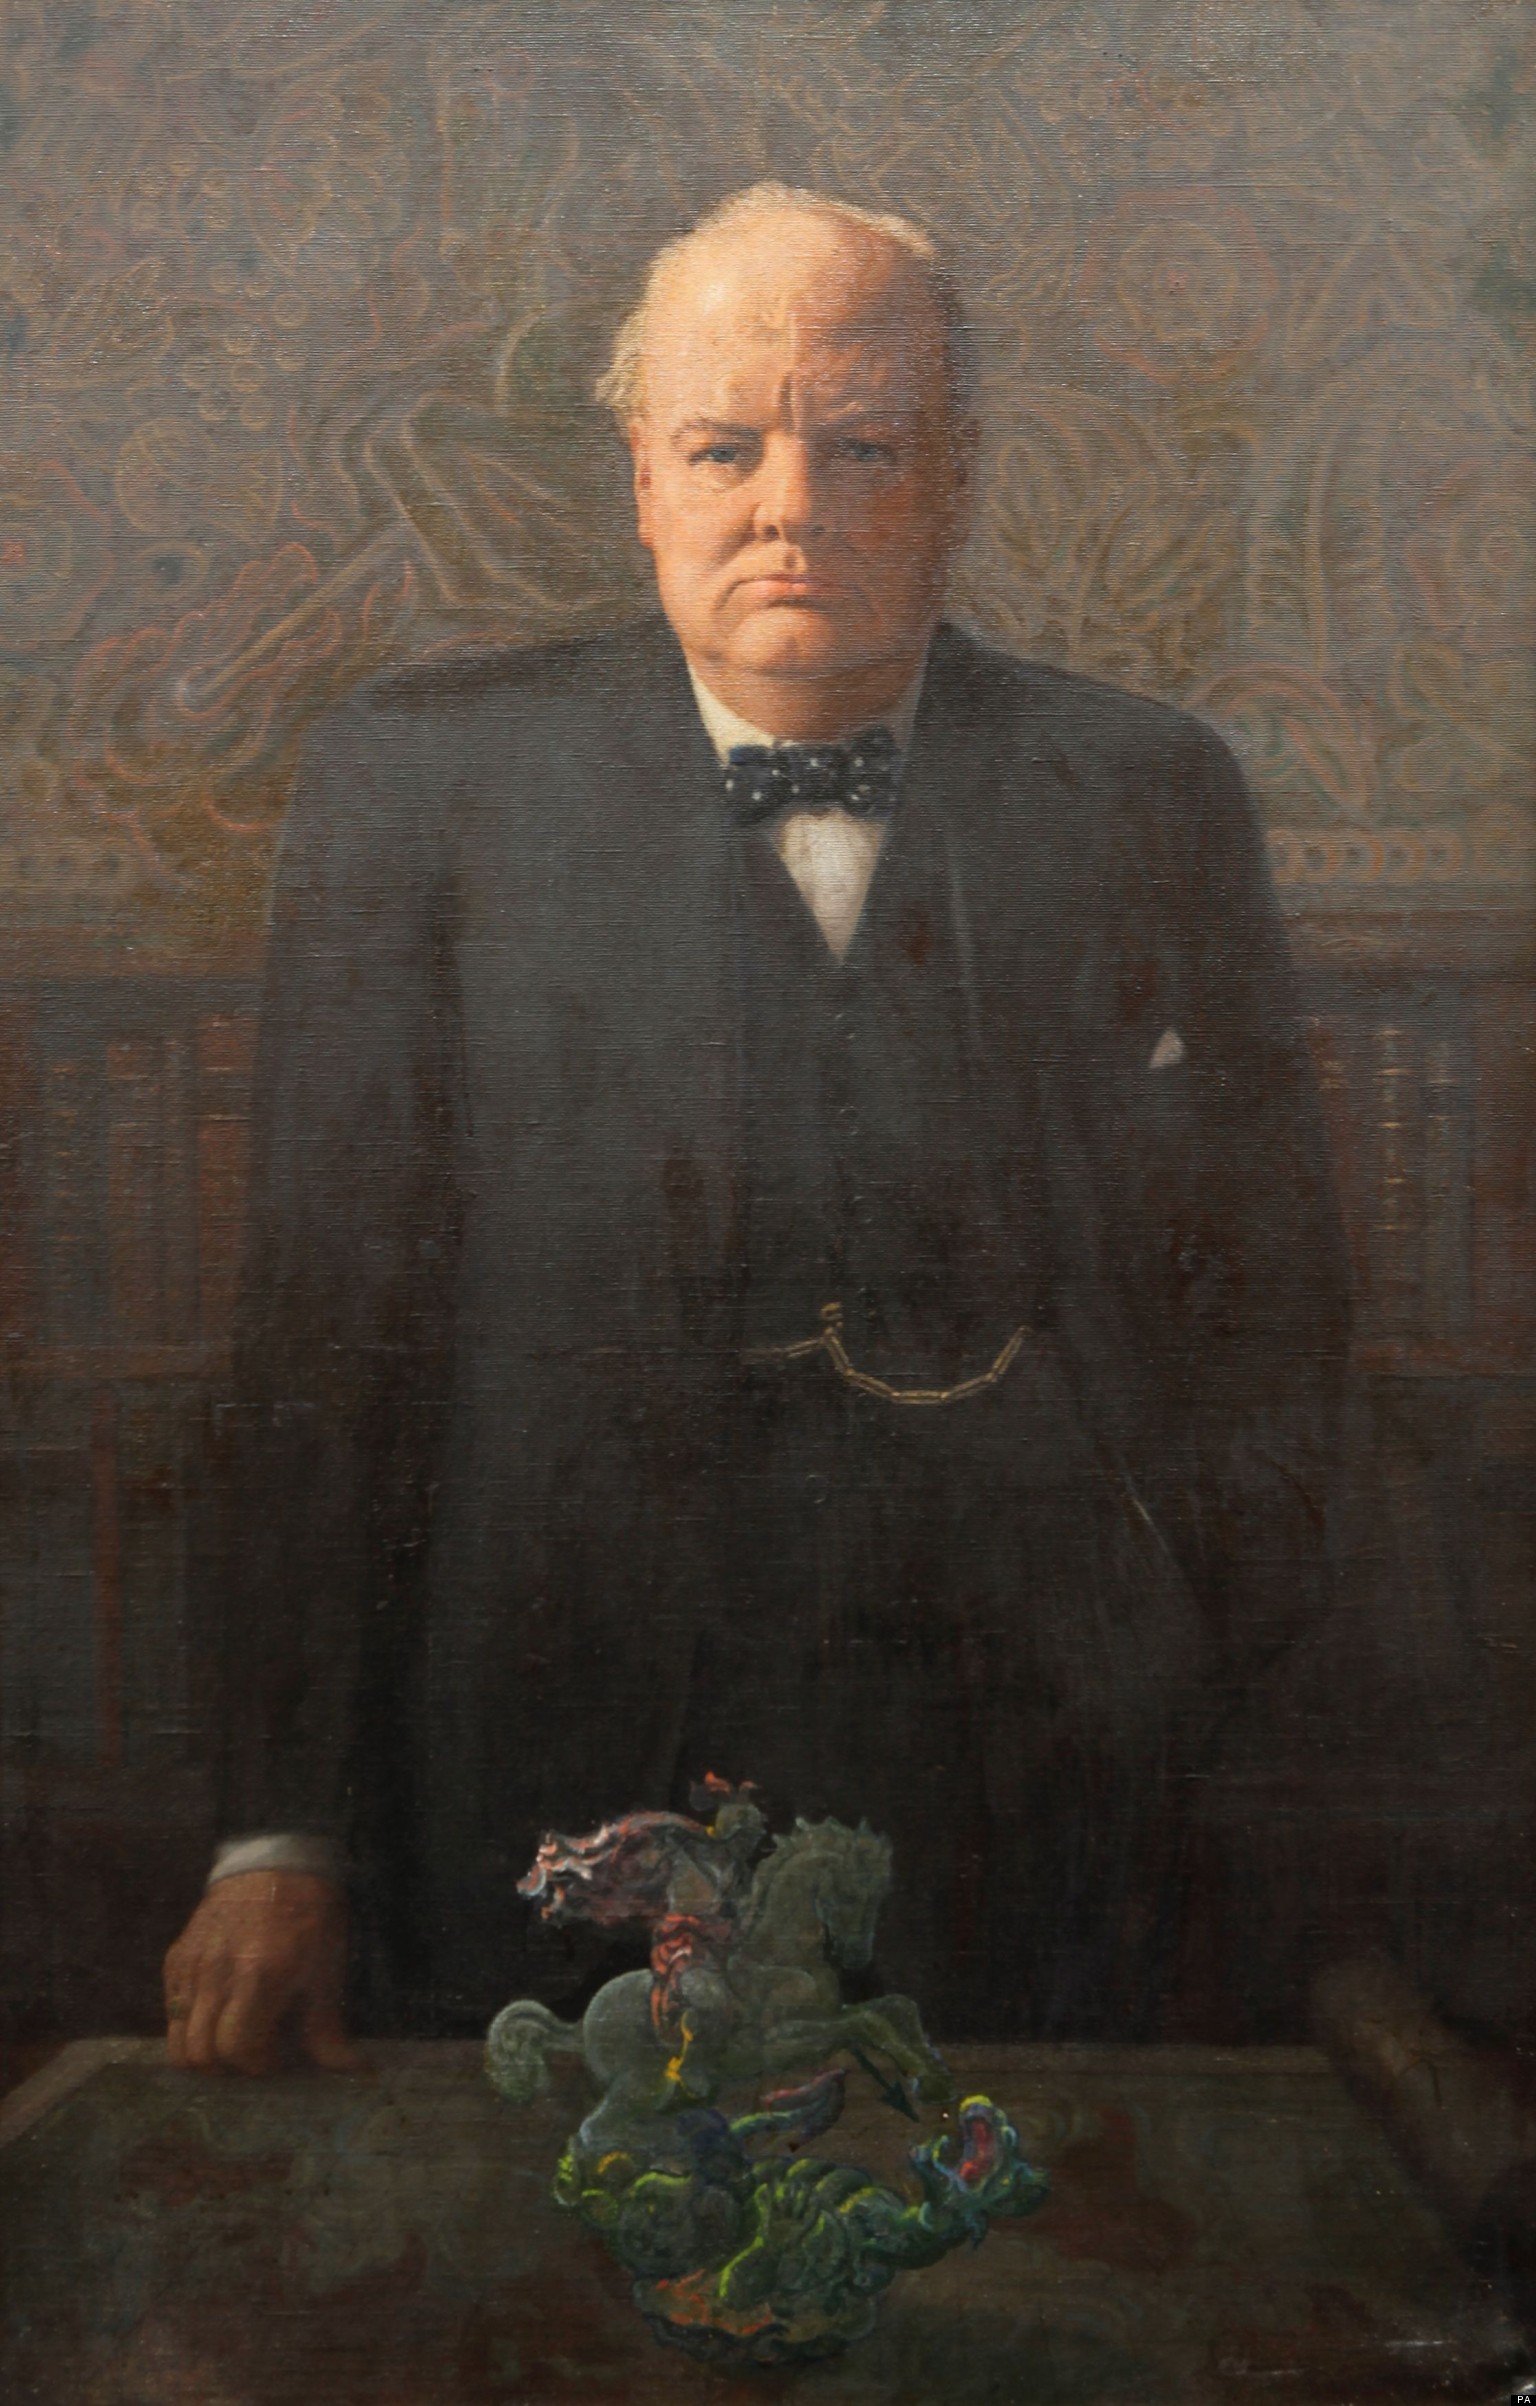 Winston Churchill Portrait From 1946 To Be Sold